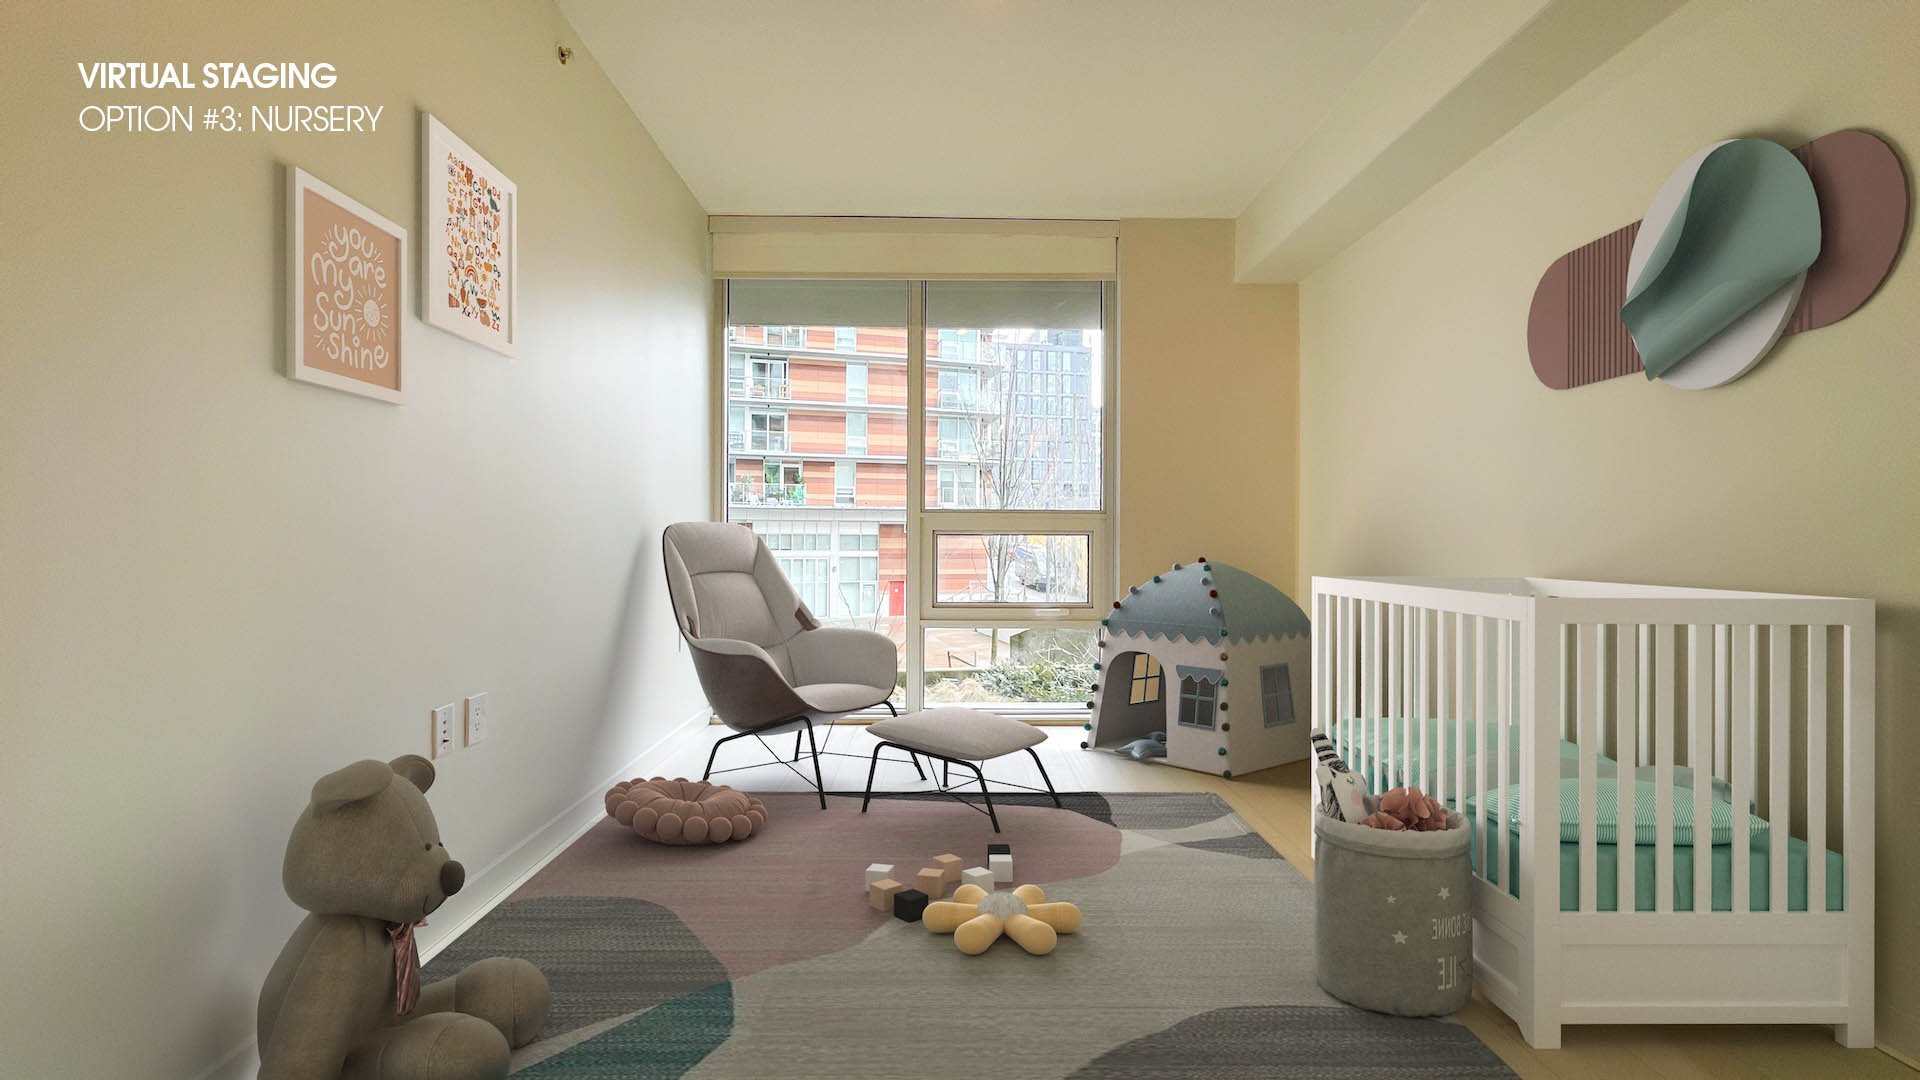 201180_E_2ND_AVE_VANCOUVER__AS_BABY_ROOM_VIRTUAL STAGING.jpg